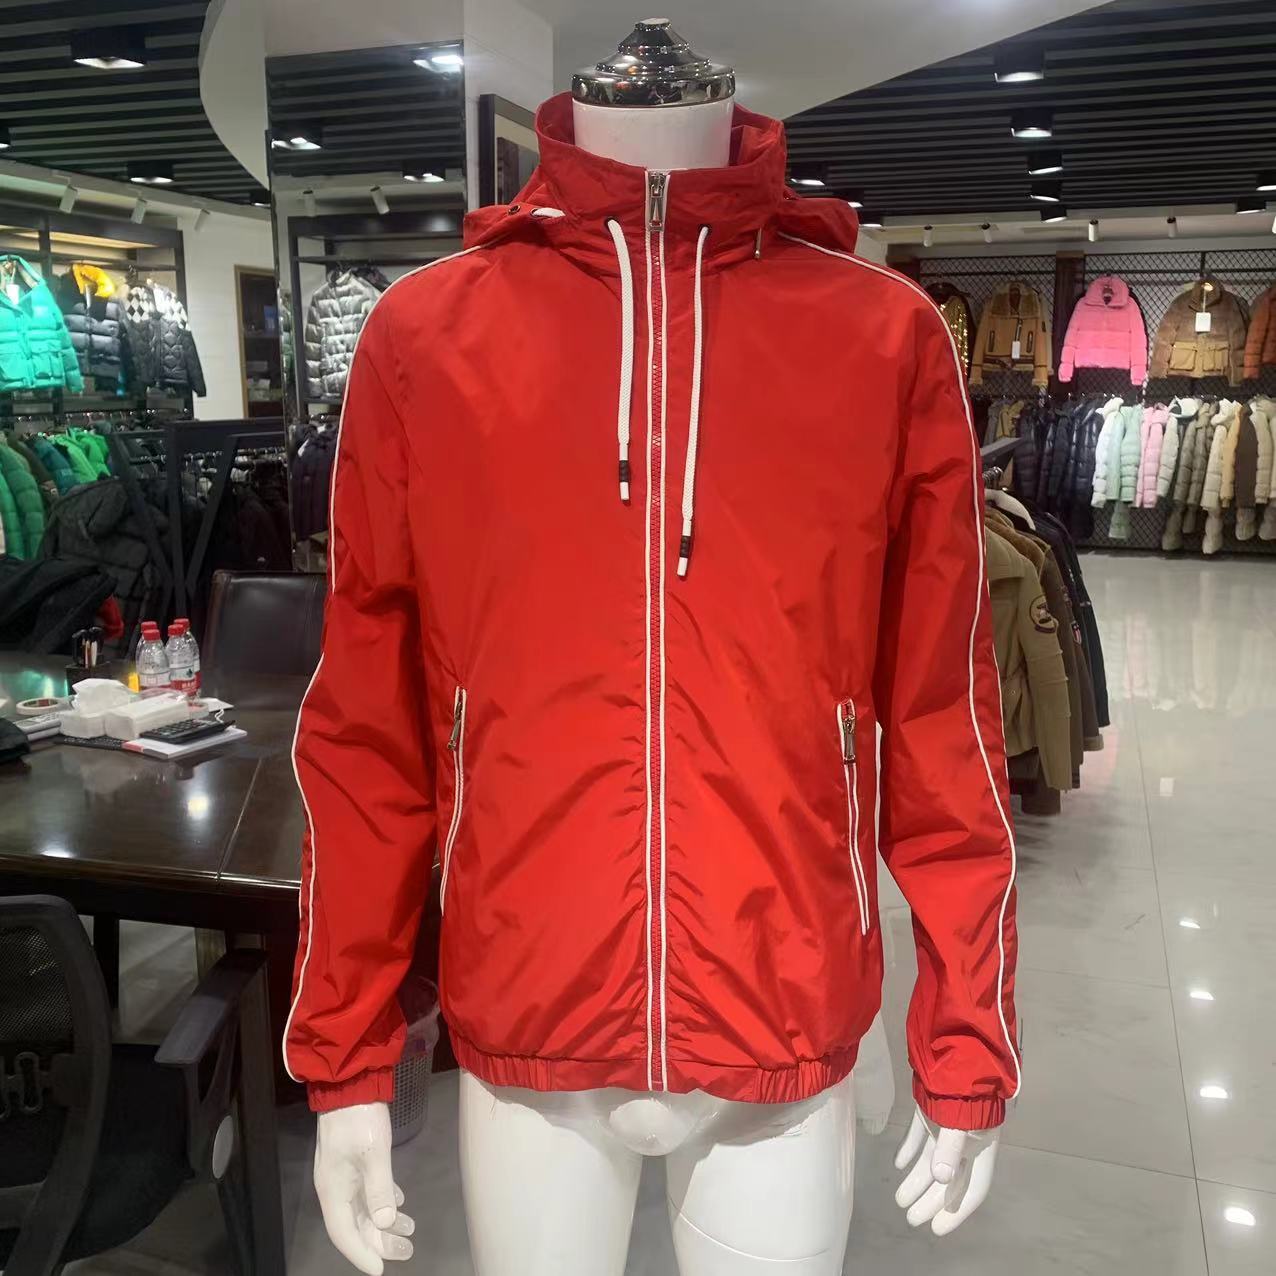 Men's spring fall casual jacket